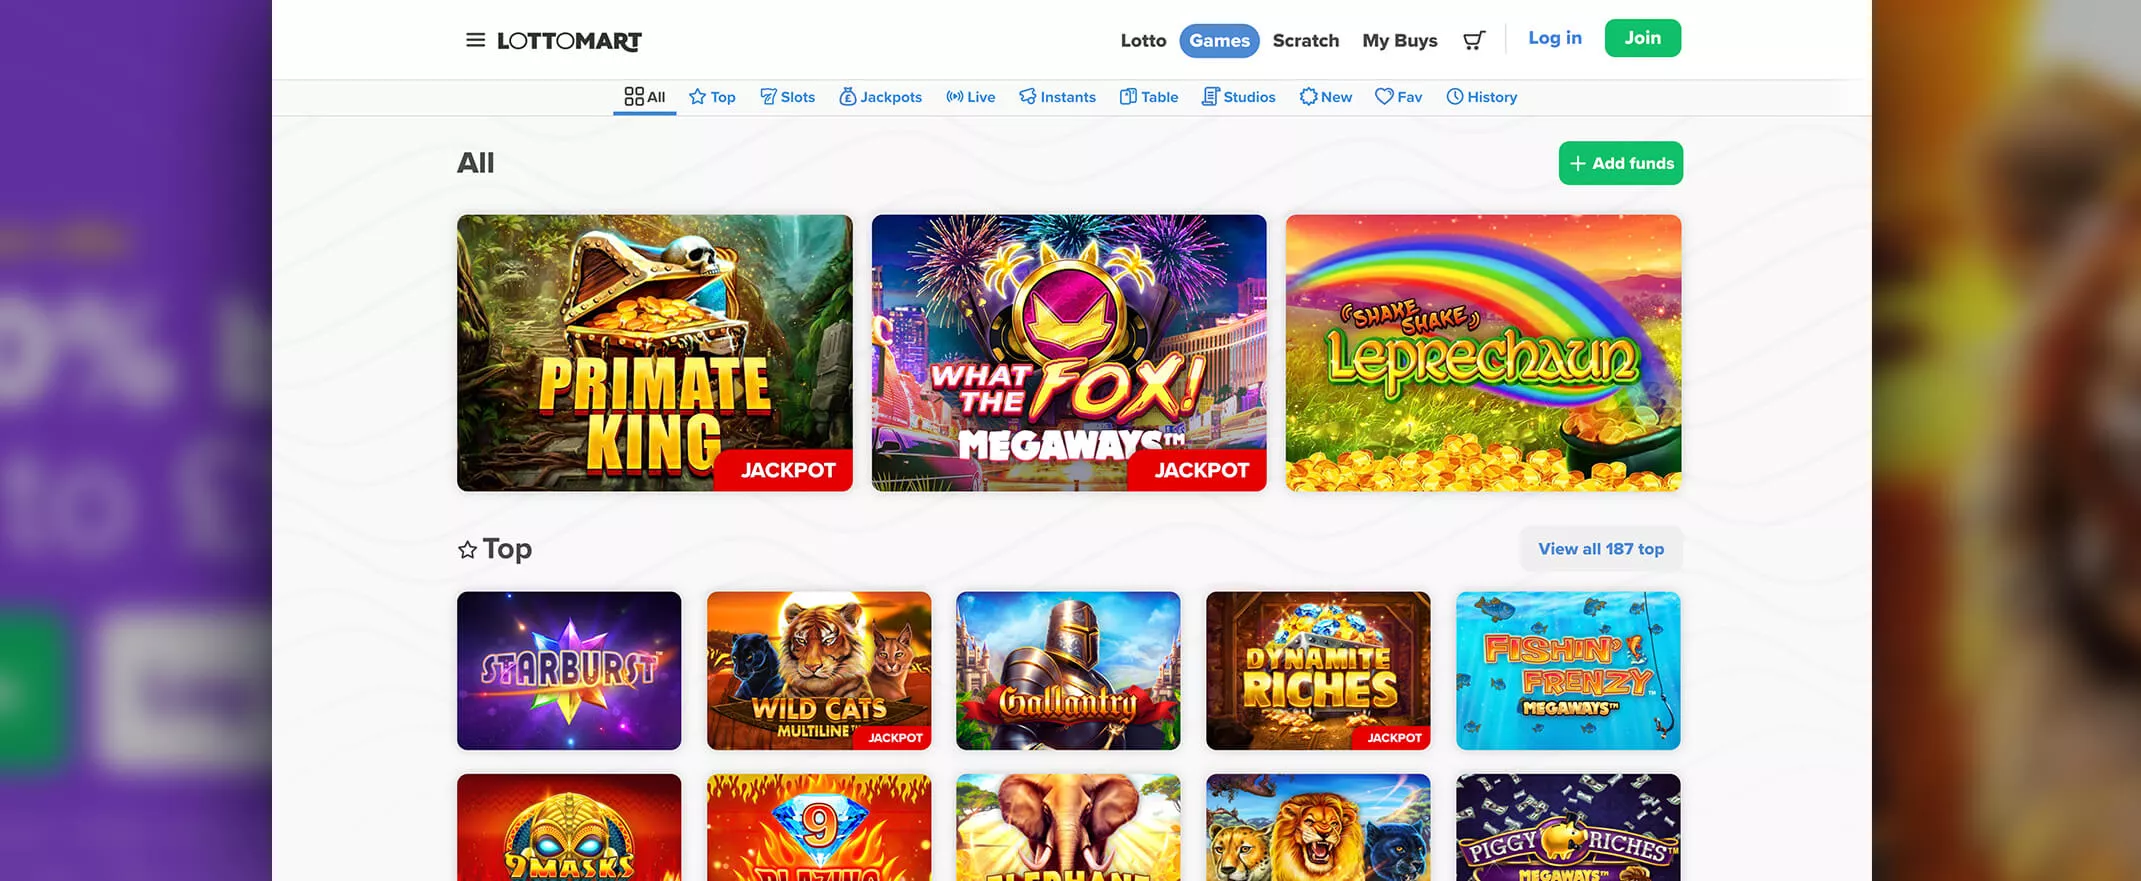 Lottomart Casino Review screenshot of the games page